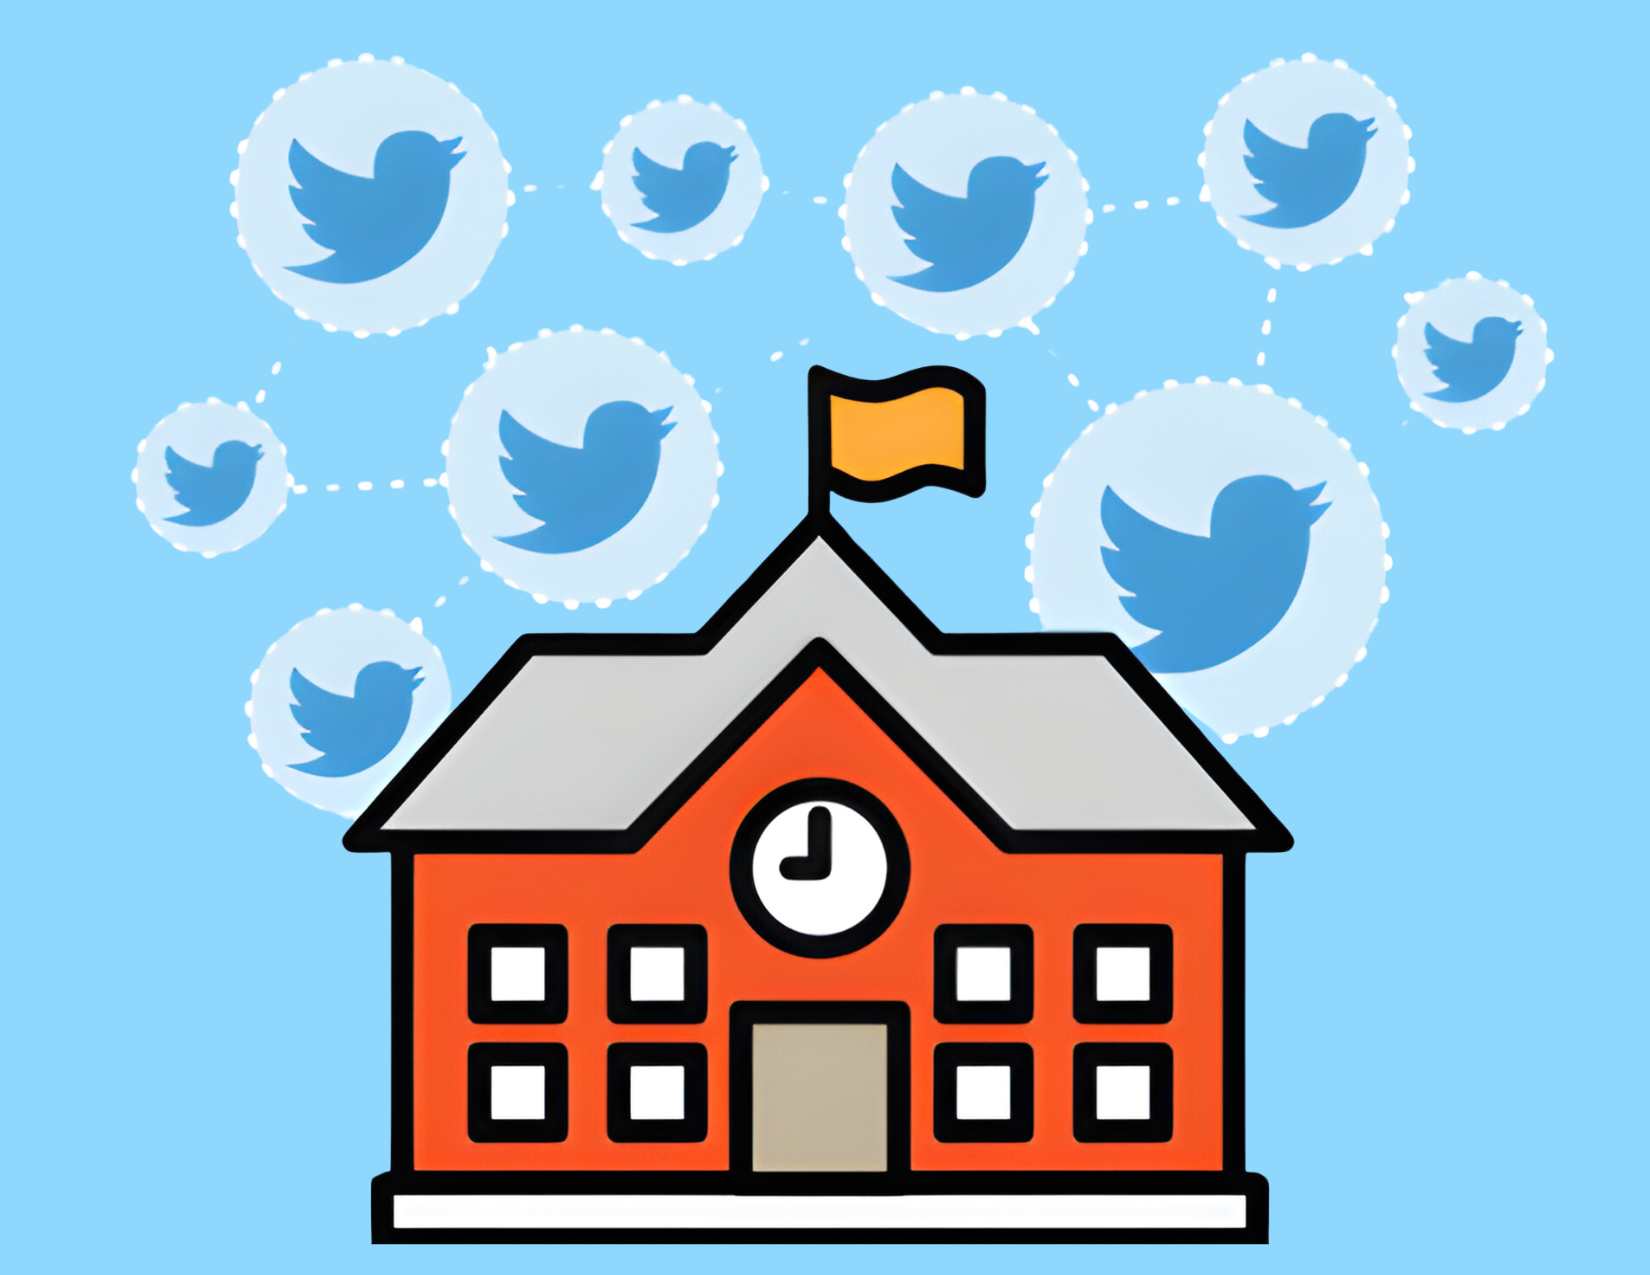 Read 4 Ways Schools Use Twitter to Increase Parent Engagement